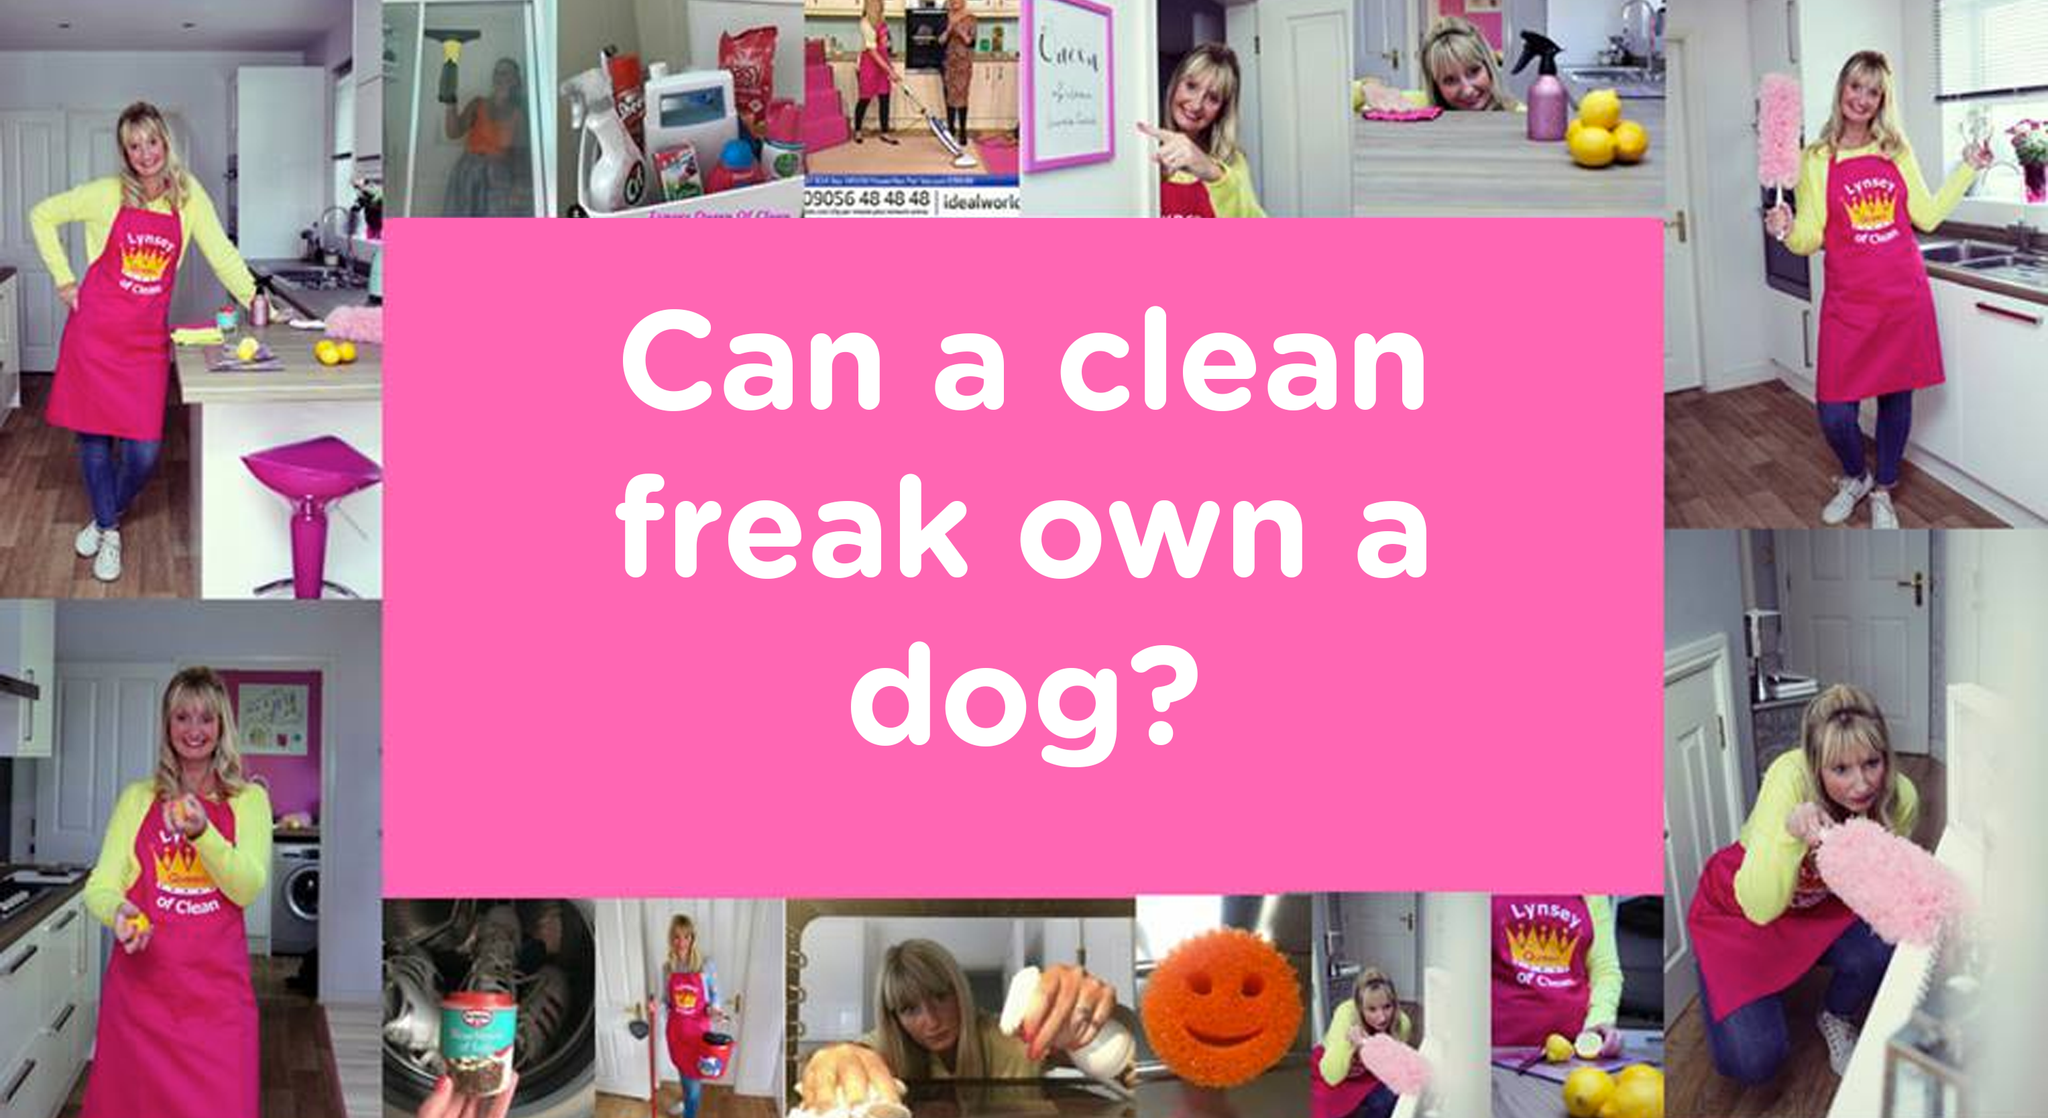 Can a clean freak like me cope with a dog?